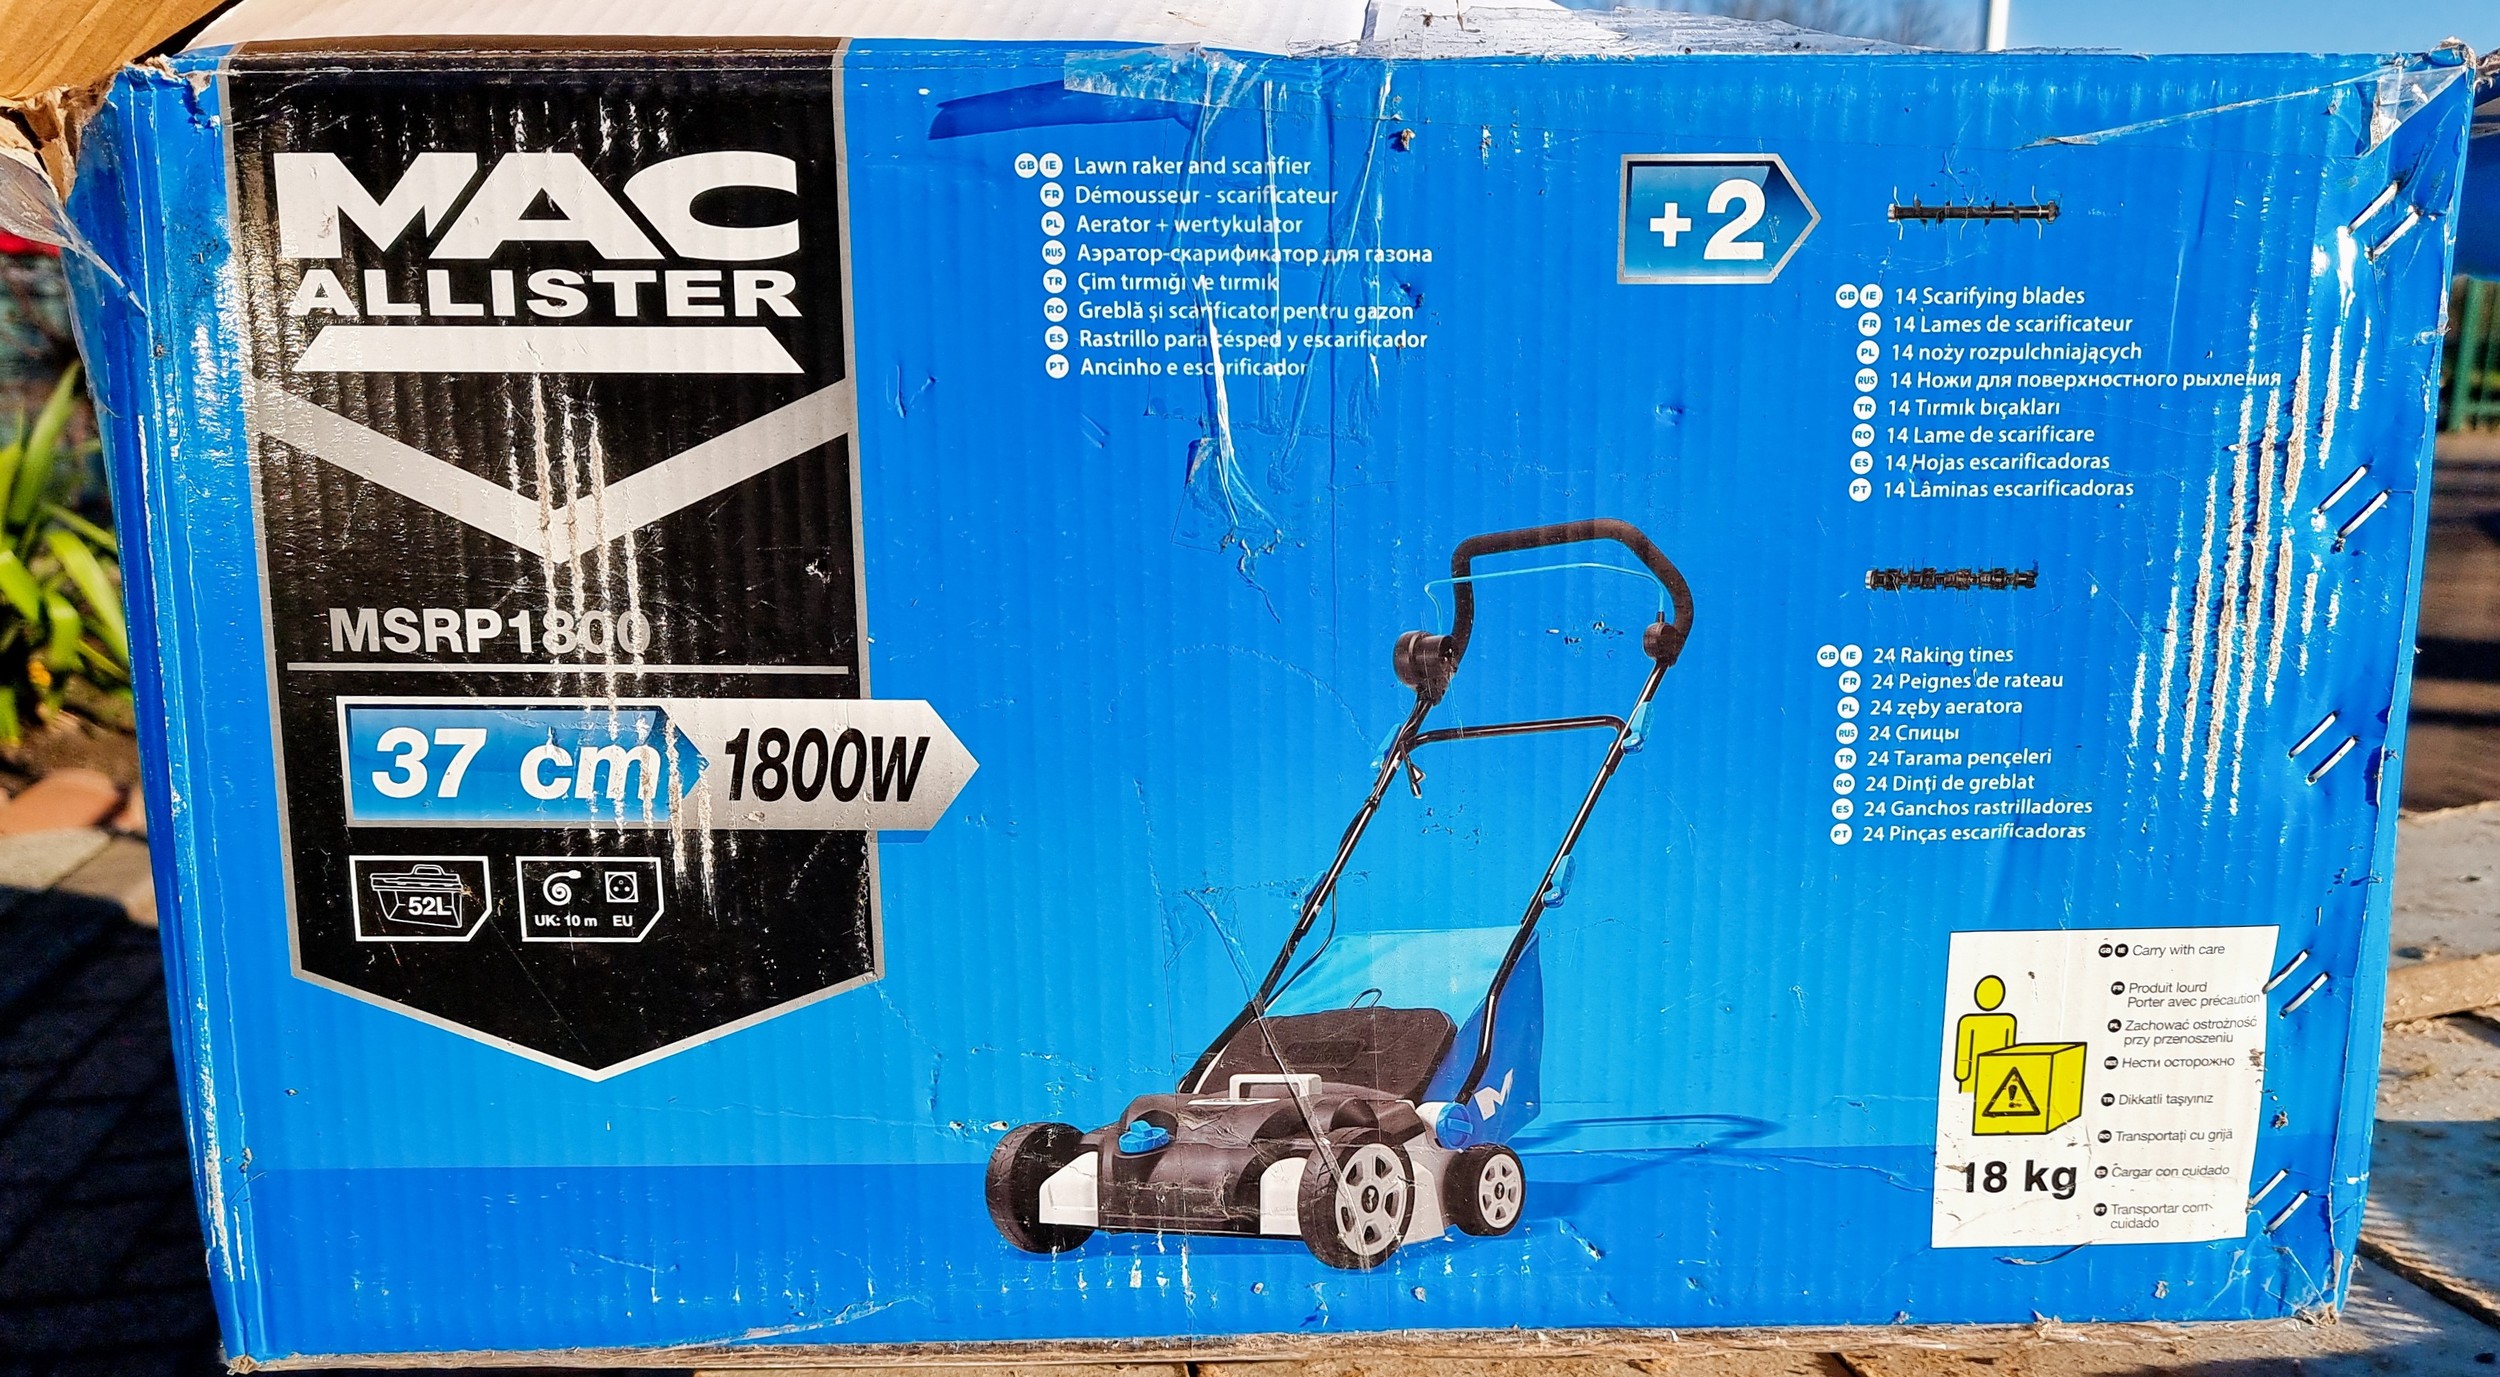 A MacAllister MSRP 1800 37cm 1800W lawn raker and scarifier, apparently unused, boxed